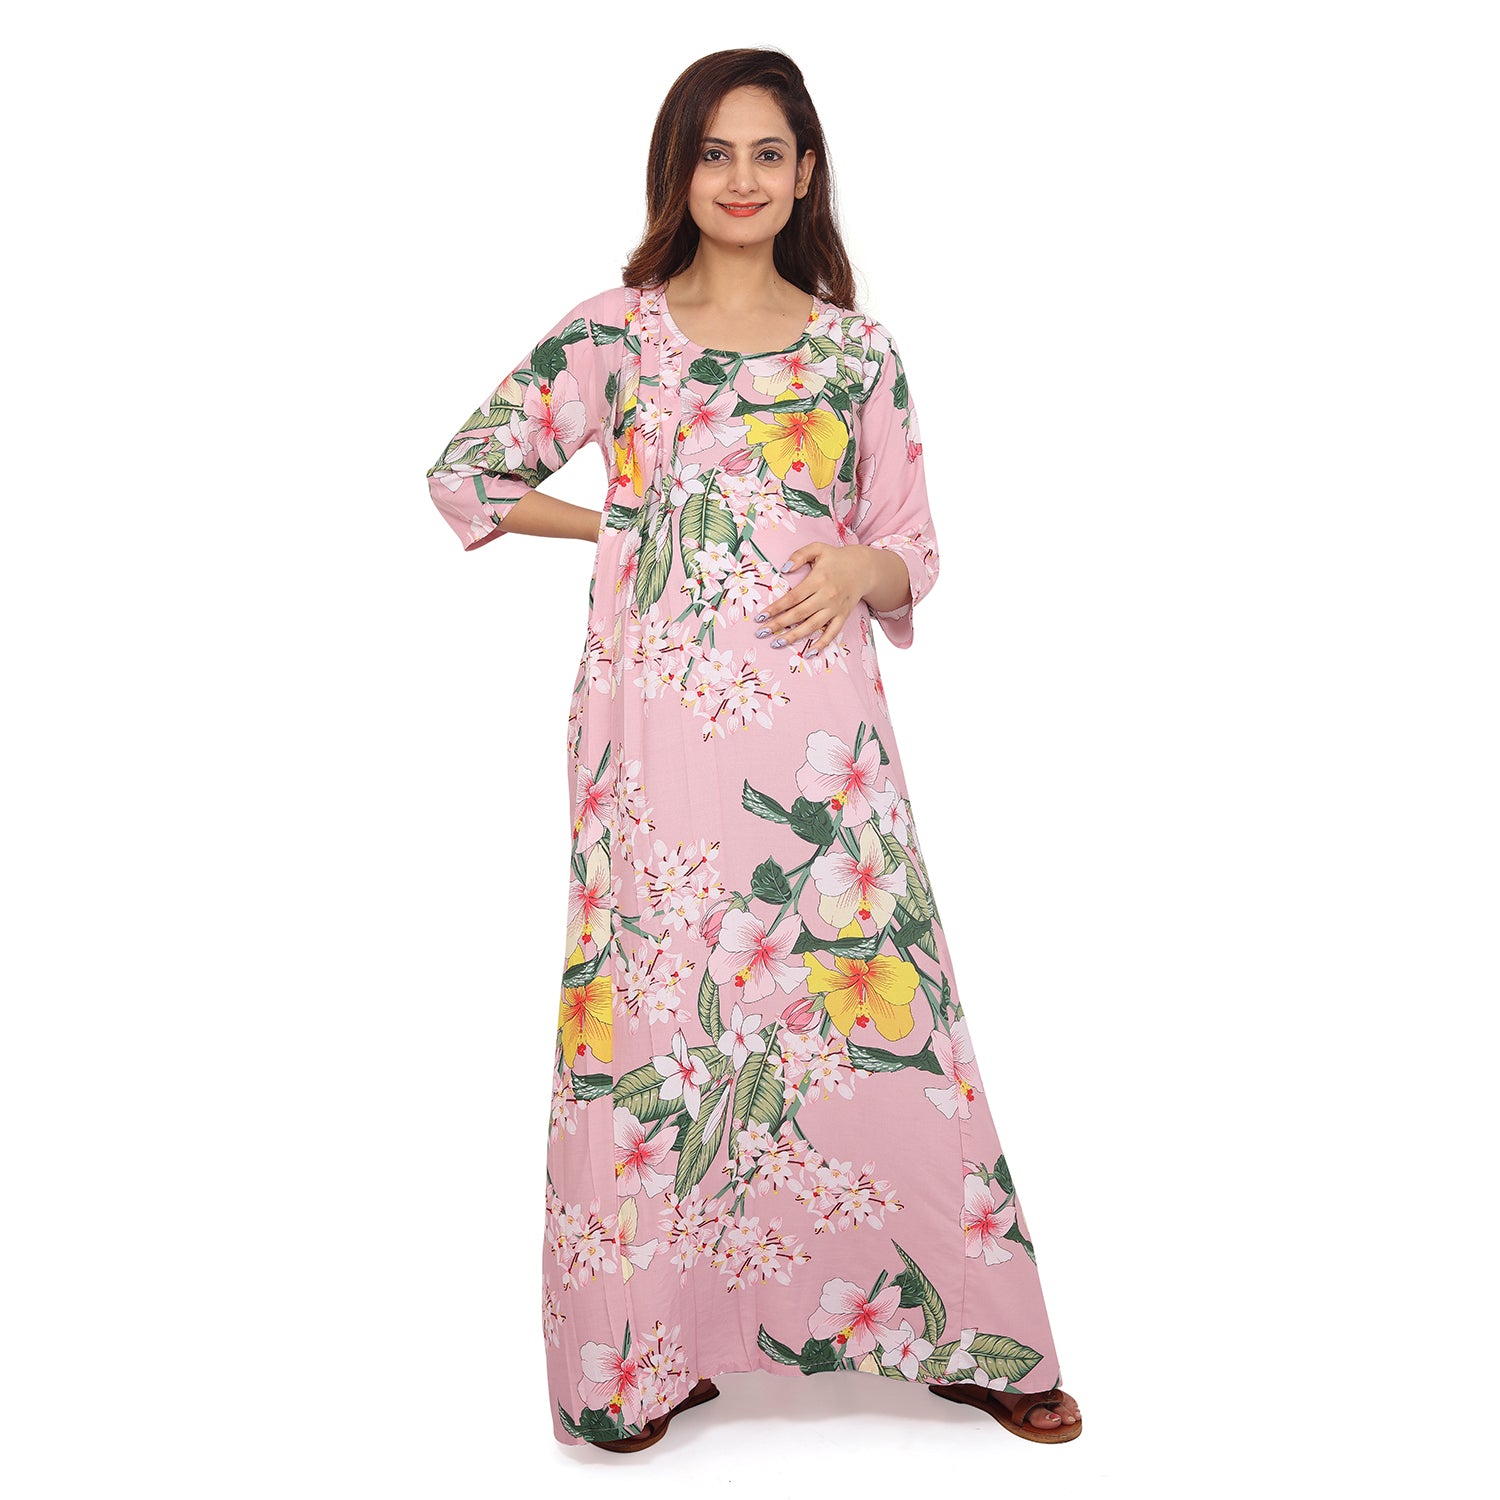 Baby Moo Full Length Comfortable Nursing And Maternity Dress Floral Lily - Pink